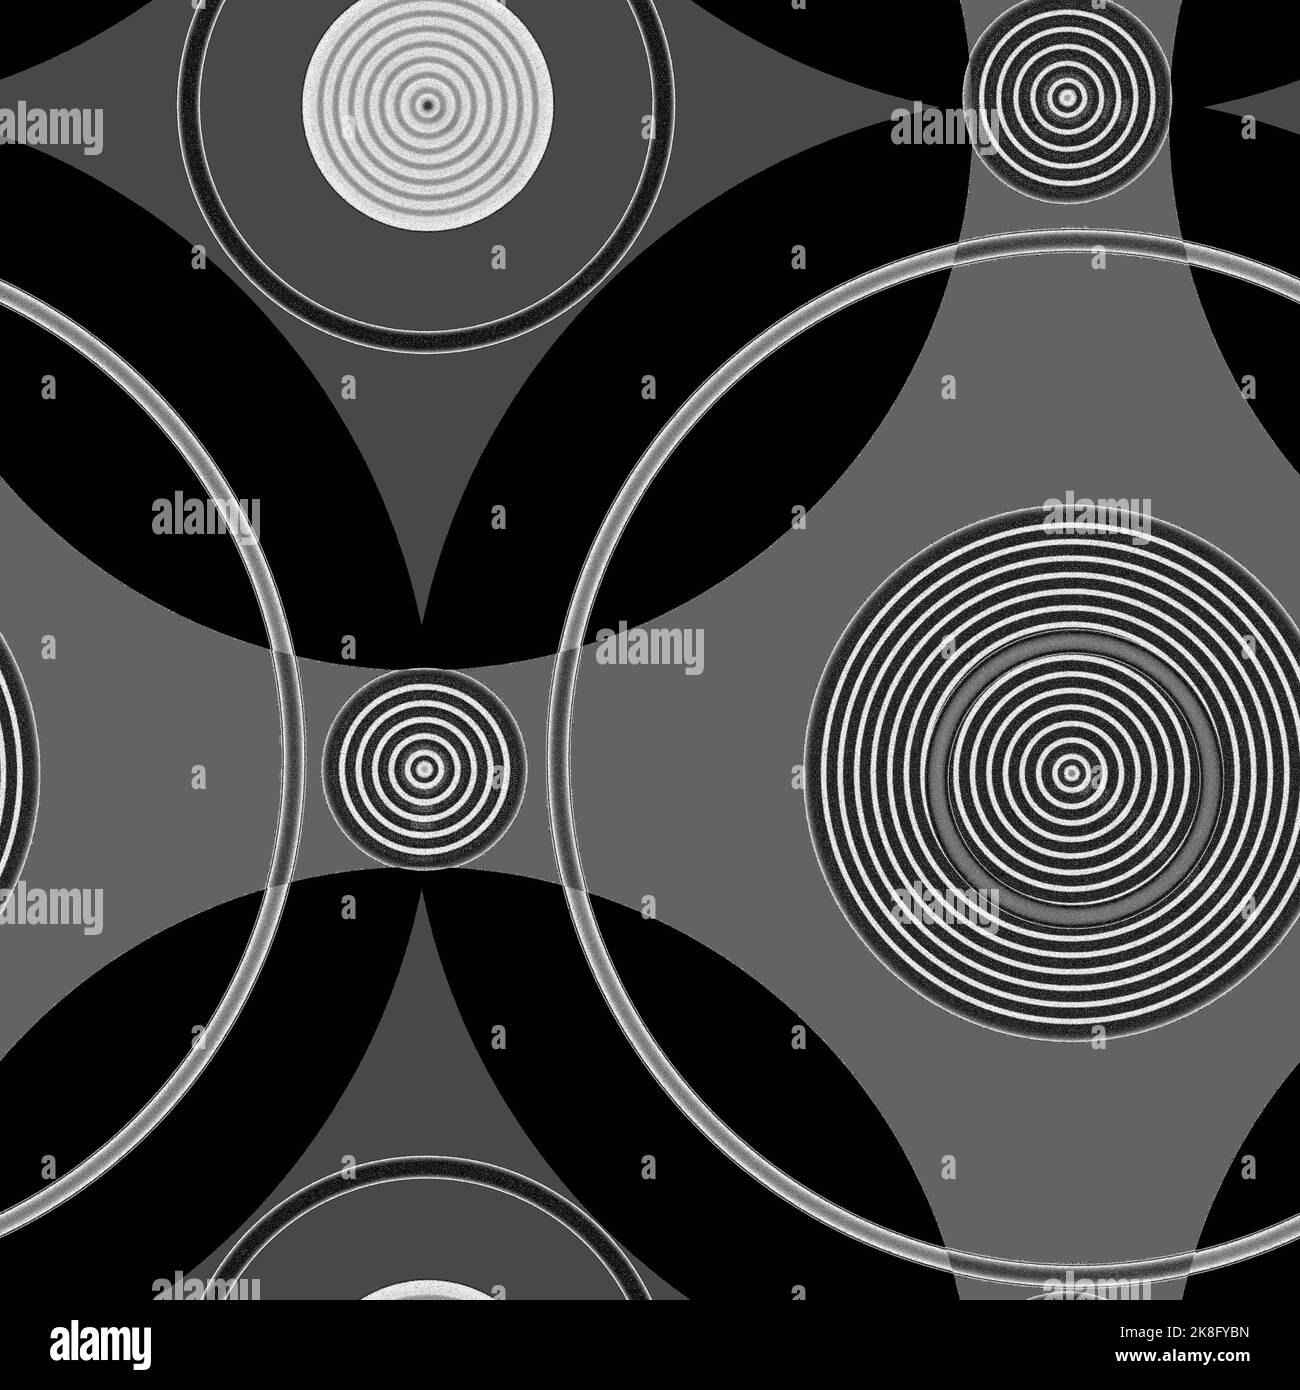 Seamless geometric in black and white abstract modern pattern created from intersecting circles.Retro shape design endless repeated texture for textil Stock Photo